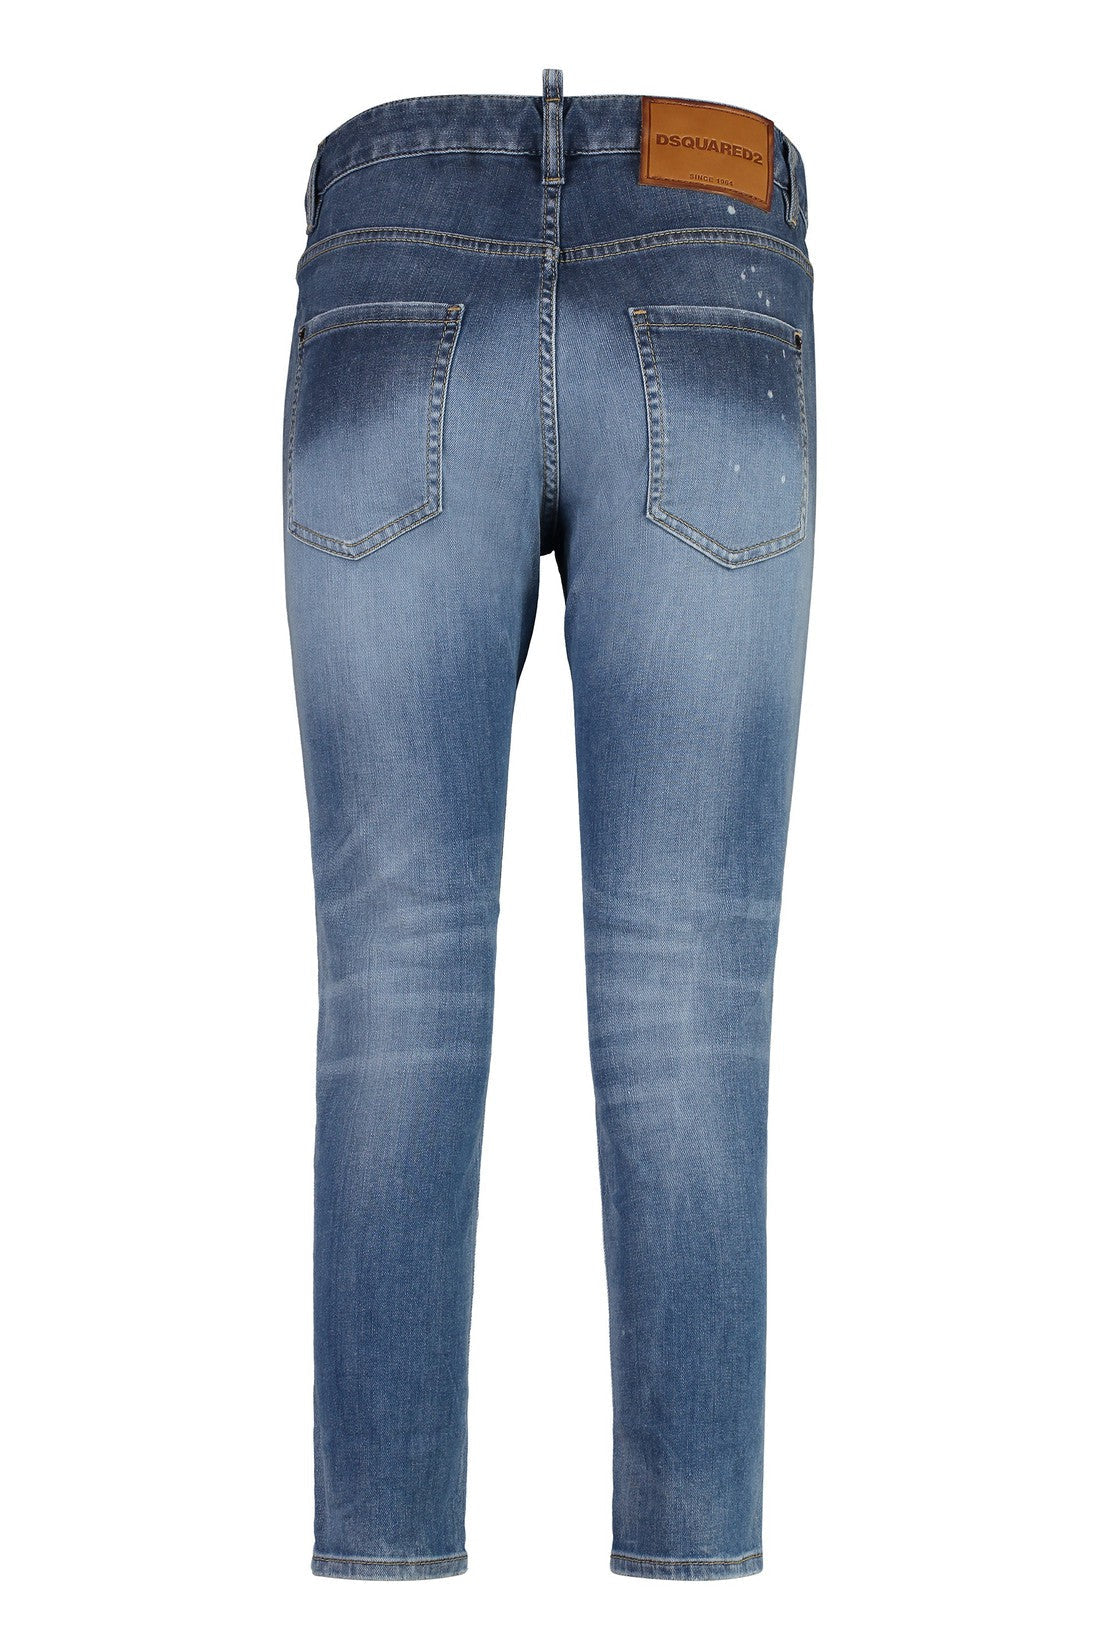 Dsquared2-OUTLET-SALE-'Cool girl' cropped jeans-ARCHIVIST